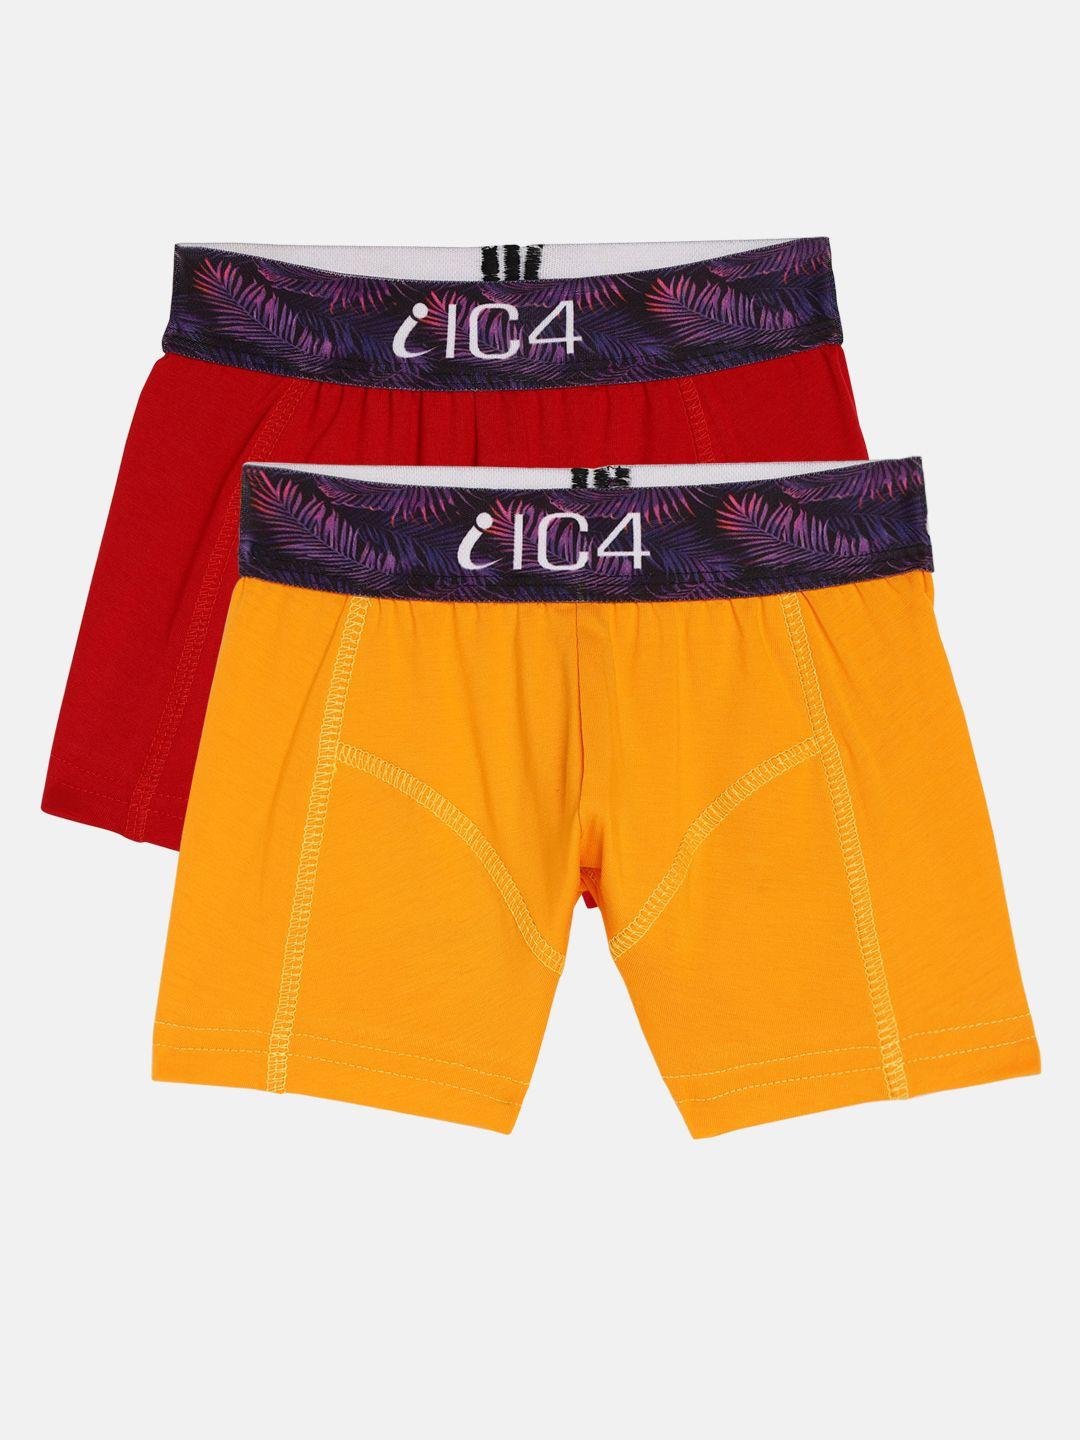 ic4 boy's pack of 2 red & yellow mini trunks